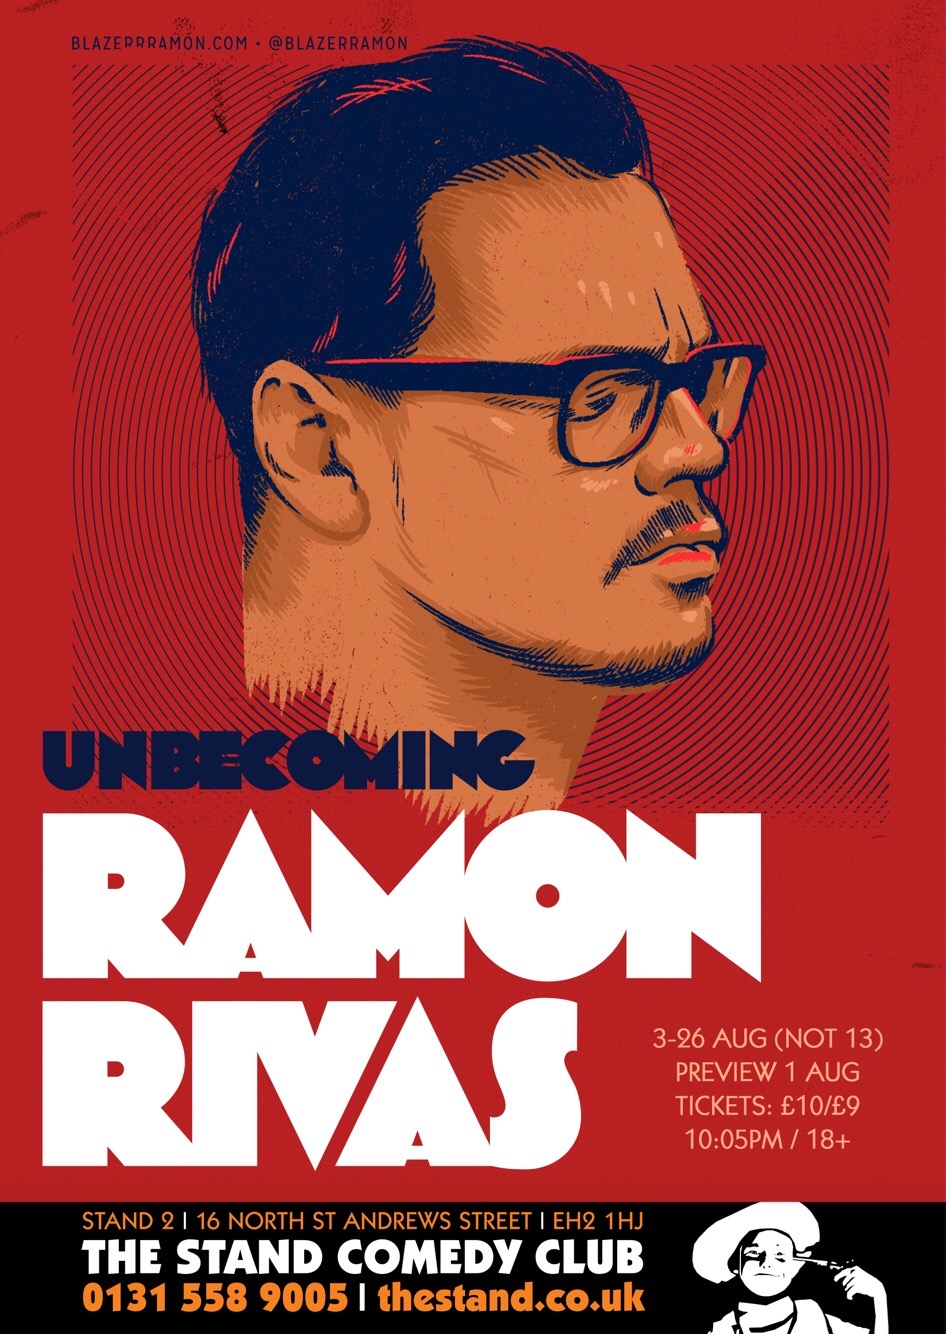 The poster for Unbecoming Ramon Rivas